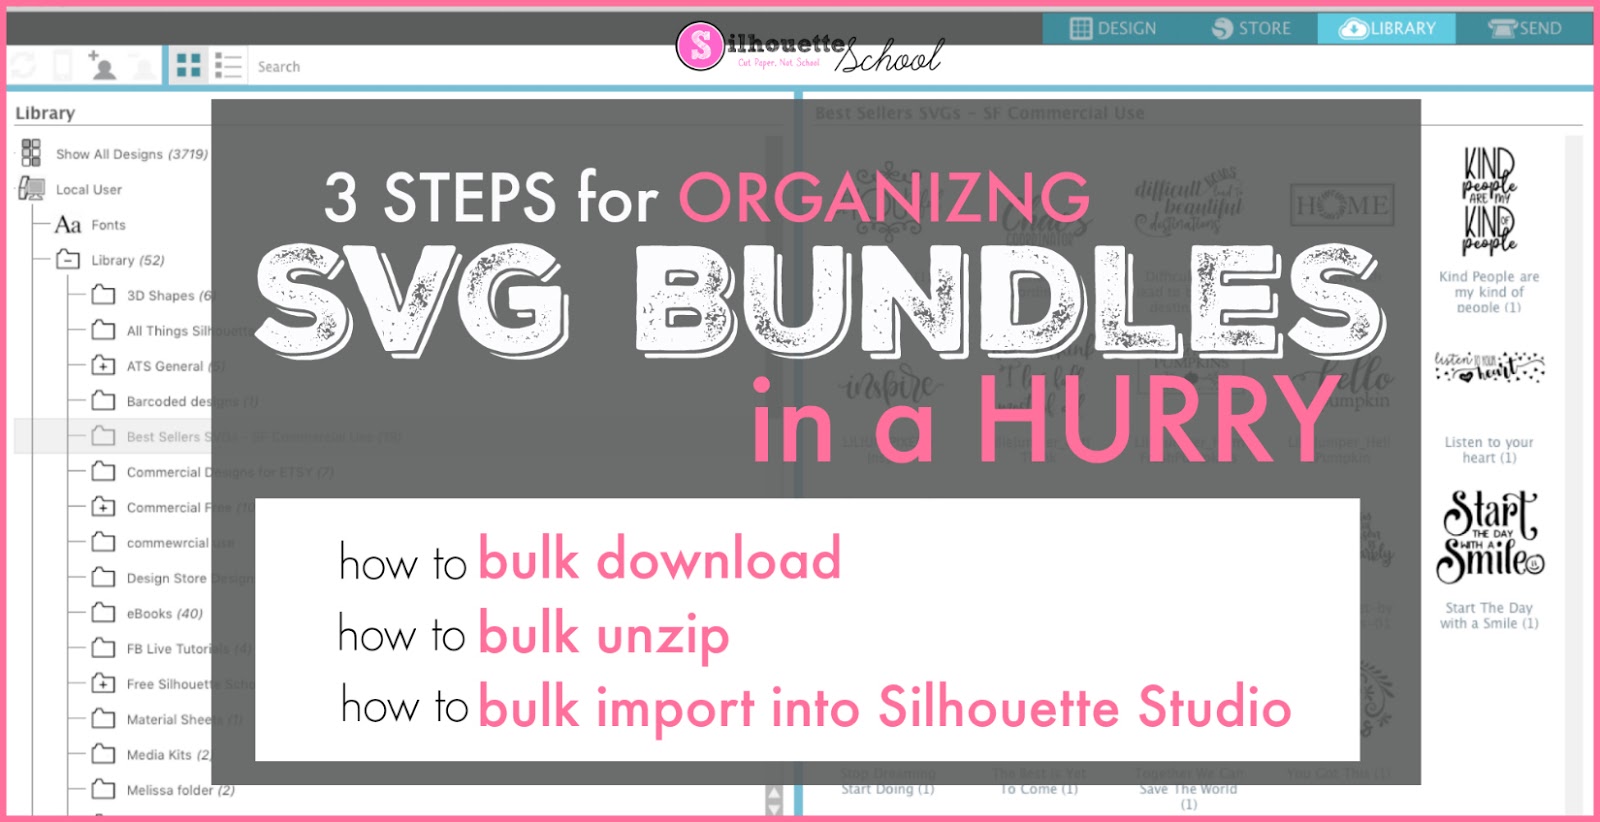 Download How To Organize Svg Bundles 3 Steps To Bulk Download Unzip And Import Into Silhouette Studio Video Tutorial Silhouette School Yellowimages Mockups